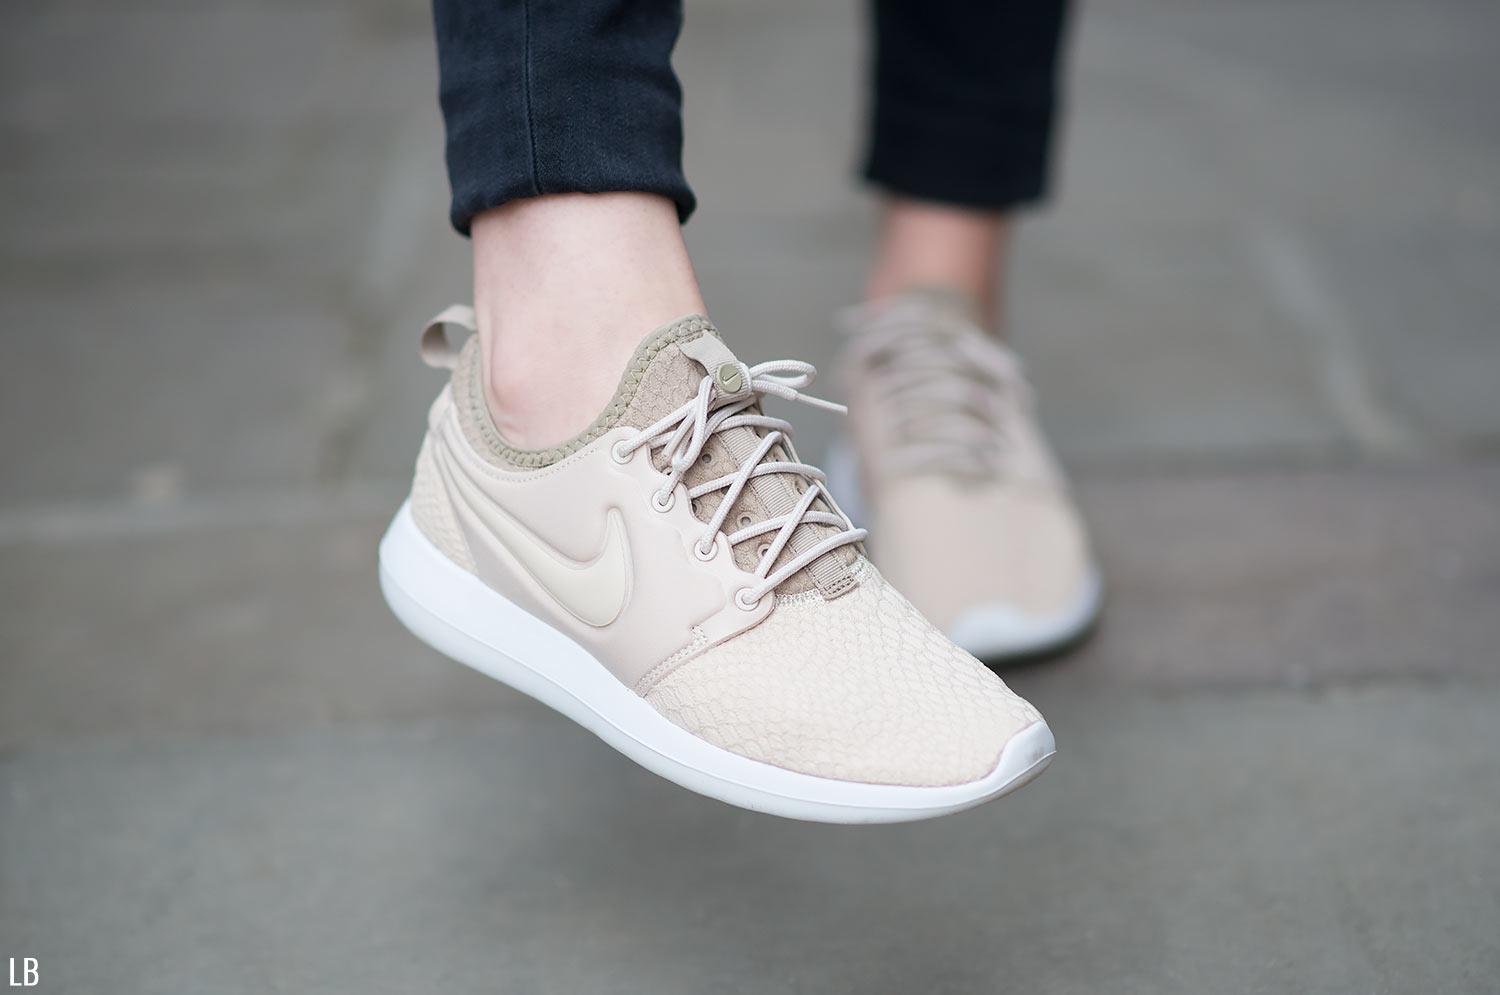 Salvaje Centelleo Excéntrico My Nike Roshe Two SE Trainers in Oatmeal Review - Raindrops of Sapphire